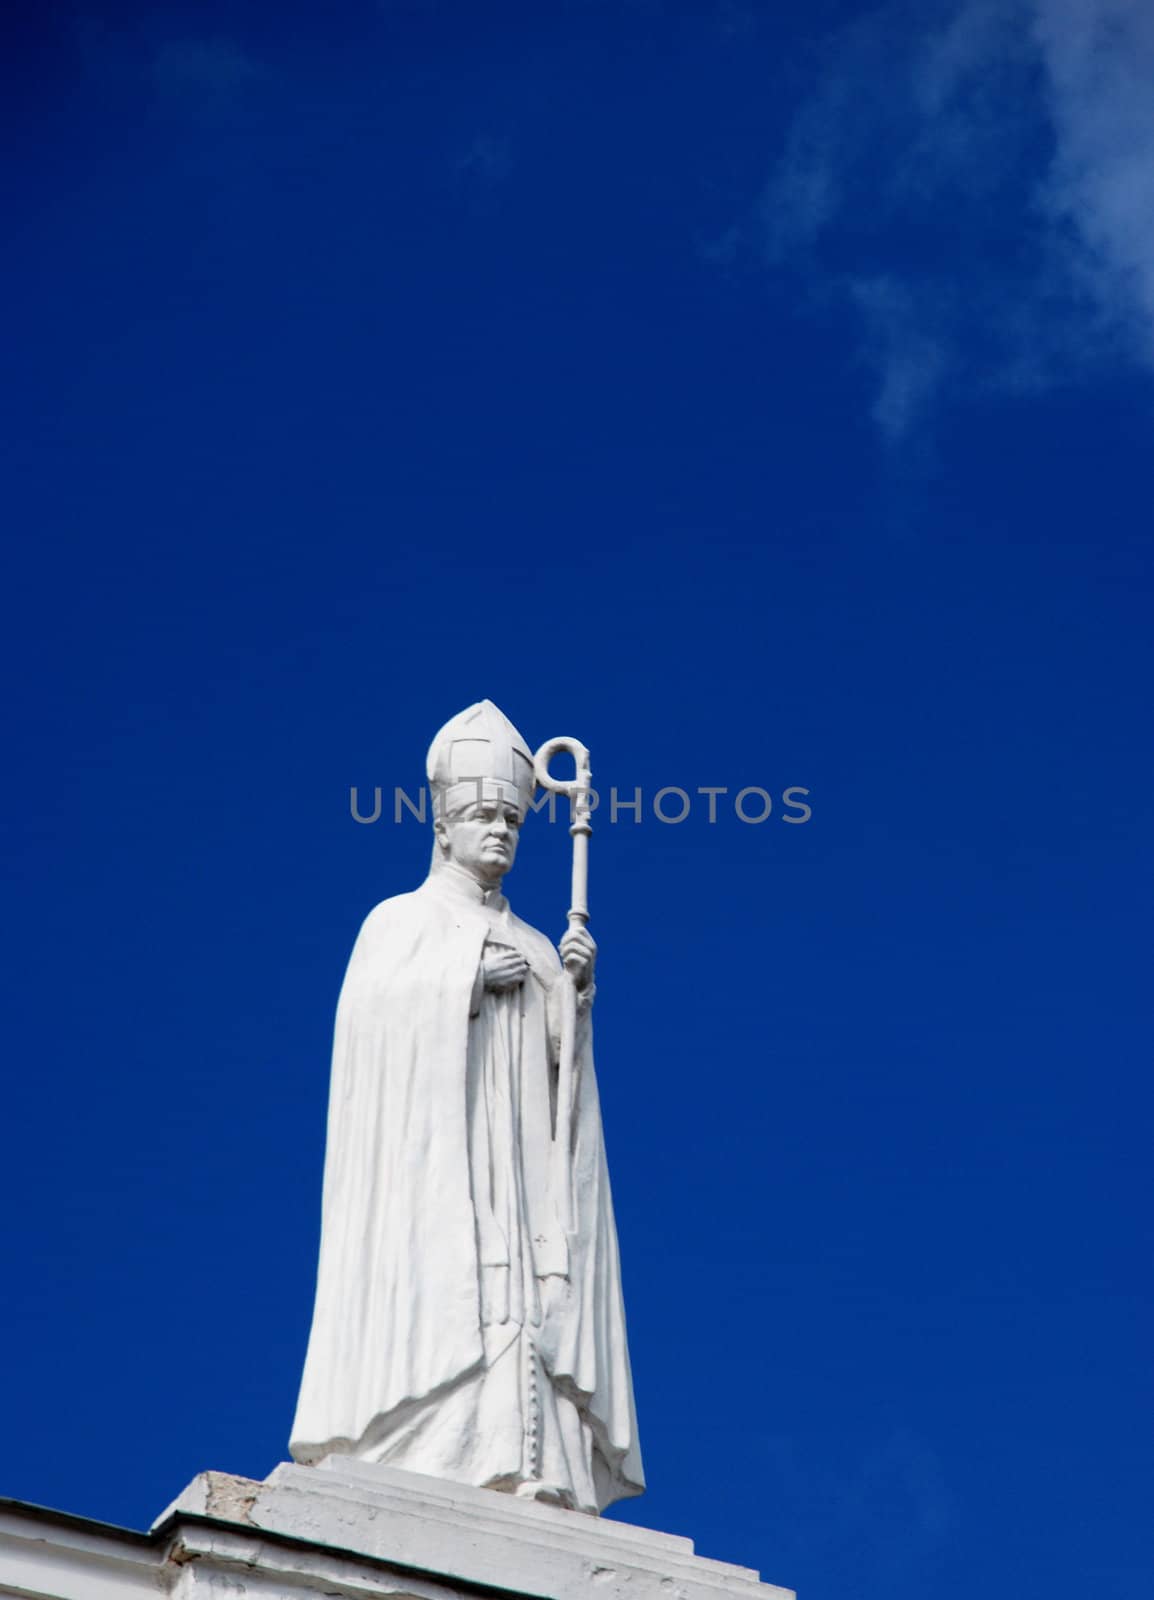 Statue of pope by sauletas